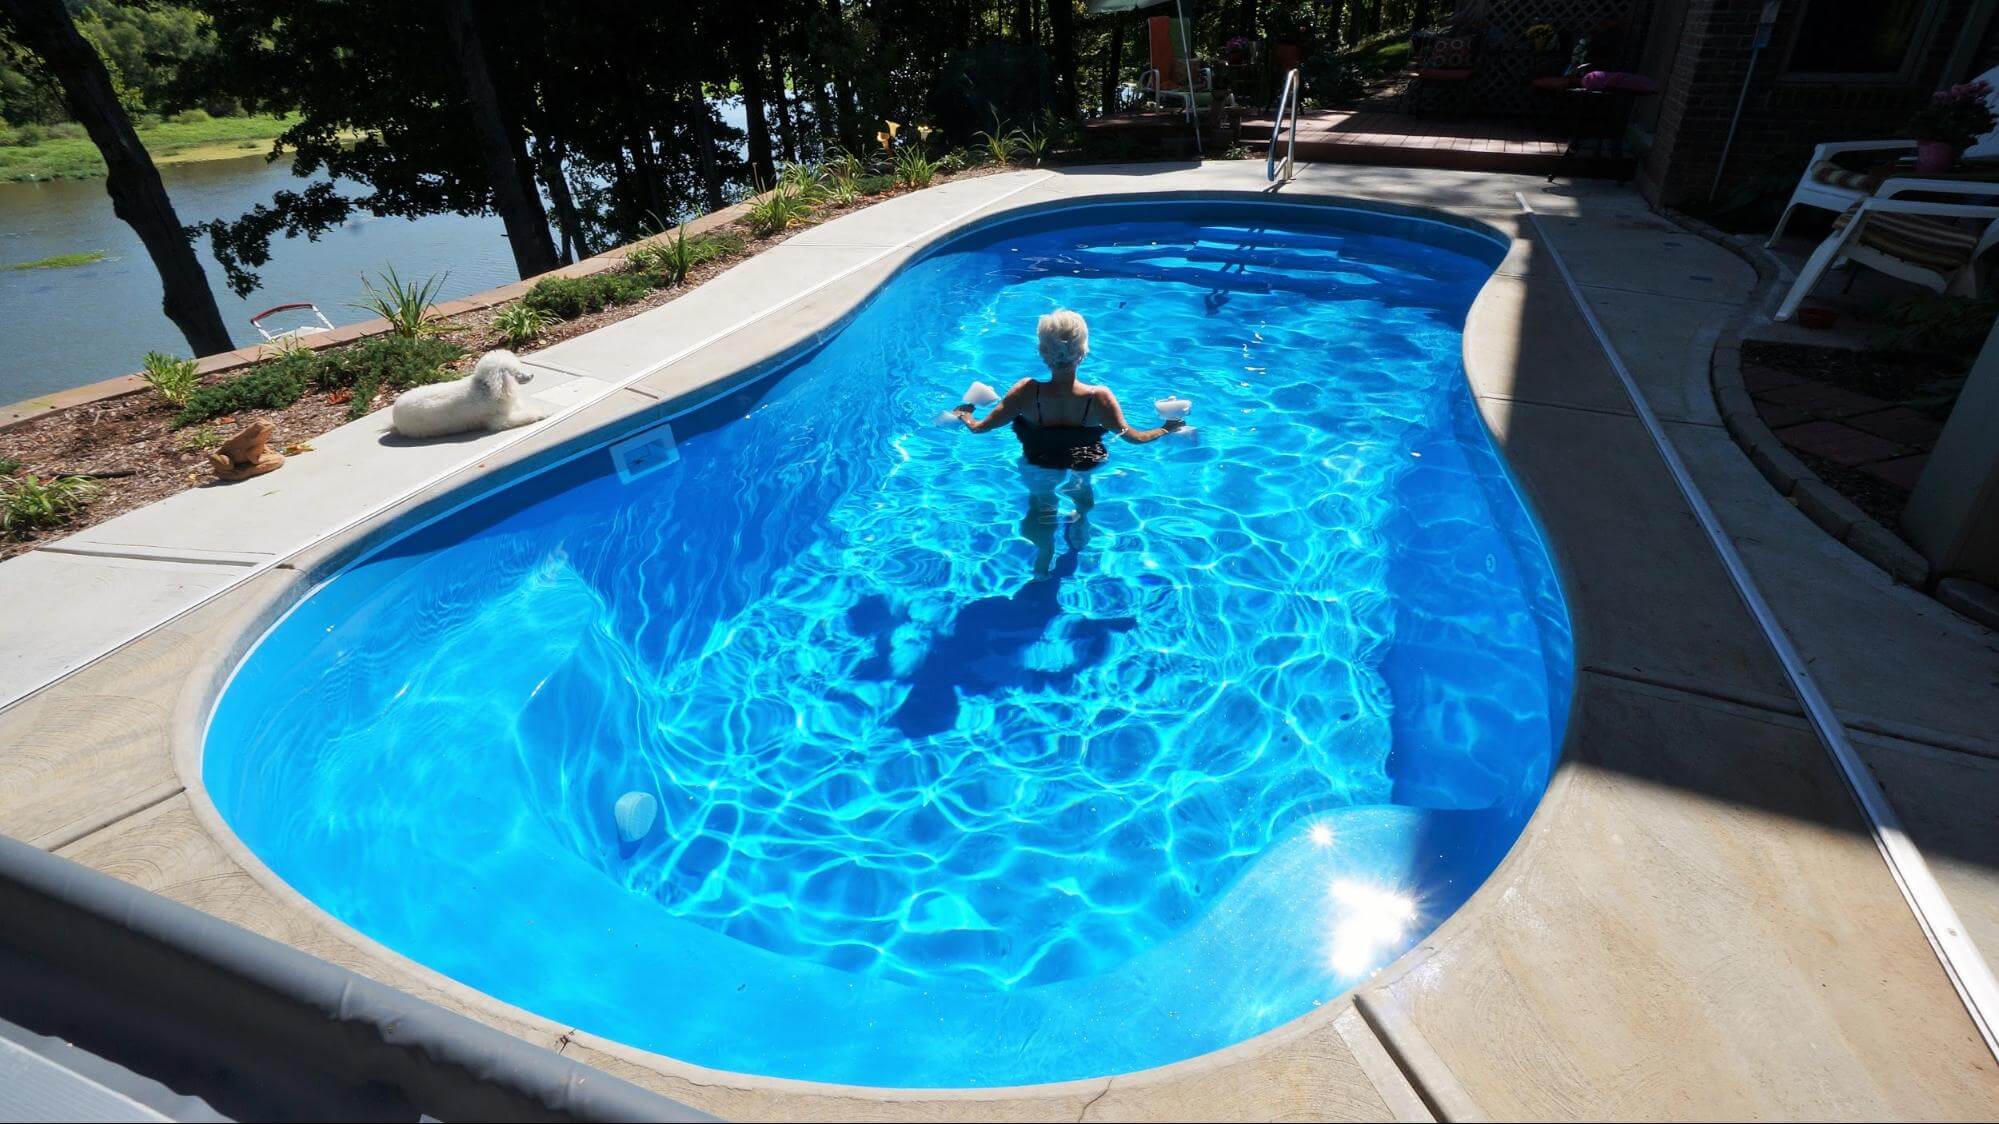 10 Water Exercises You Can Do in Your Fiberglass Pool